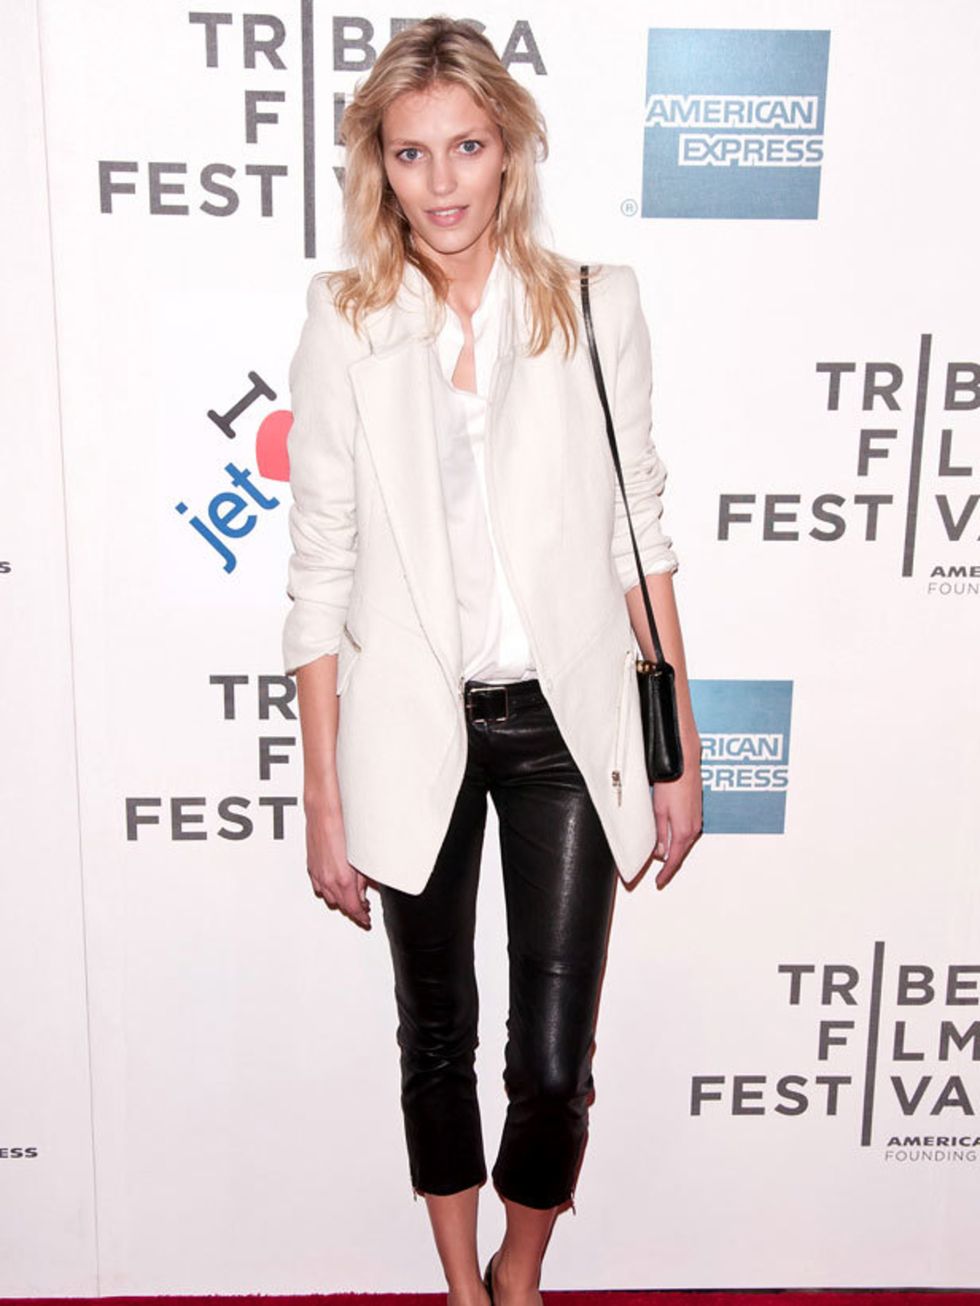 <p><a href="http://www.elleuk.com/content/search?SearchText=Anja+Rubik&amp;SearchButton=Search">Anja Rubik</a> keeps it simple in monochrome with a splash of leopard print at the Tribeca Film Festival, New York, April 2011</p>